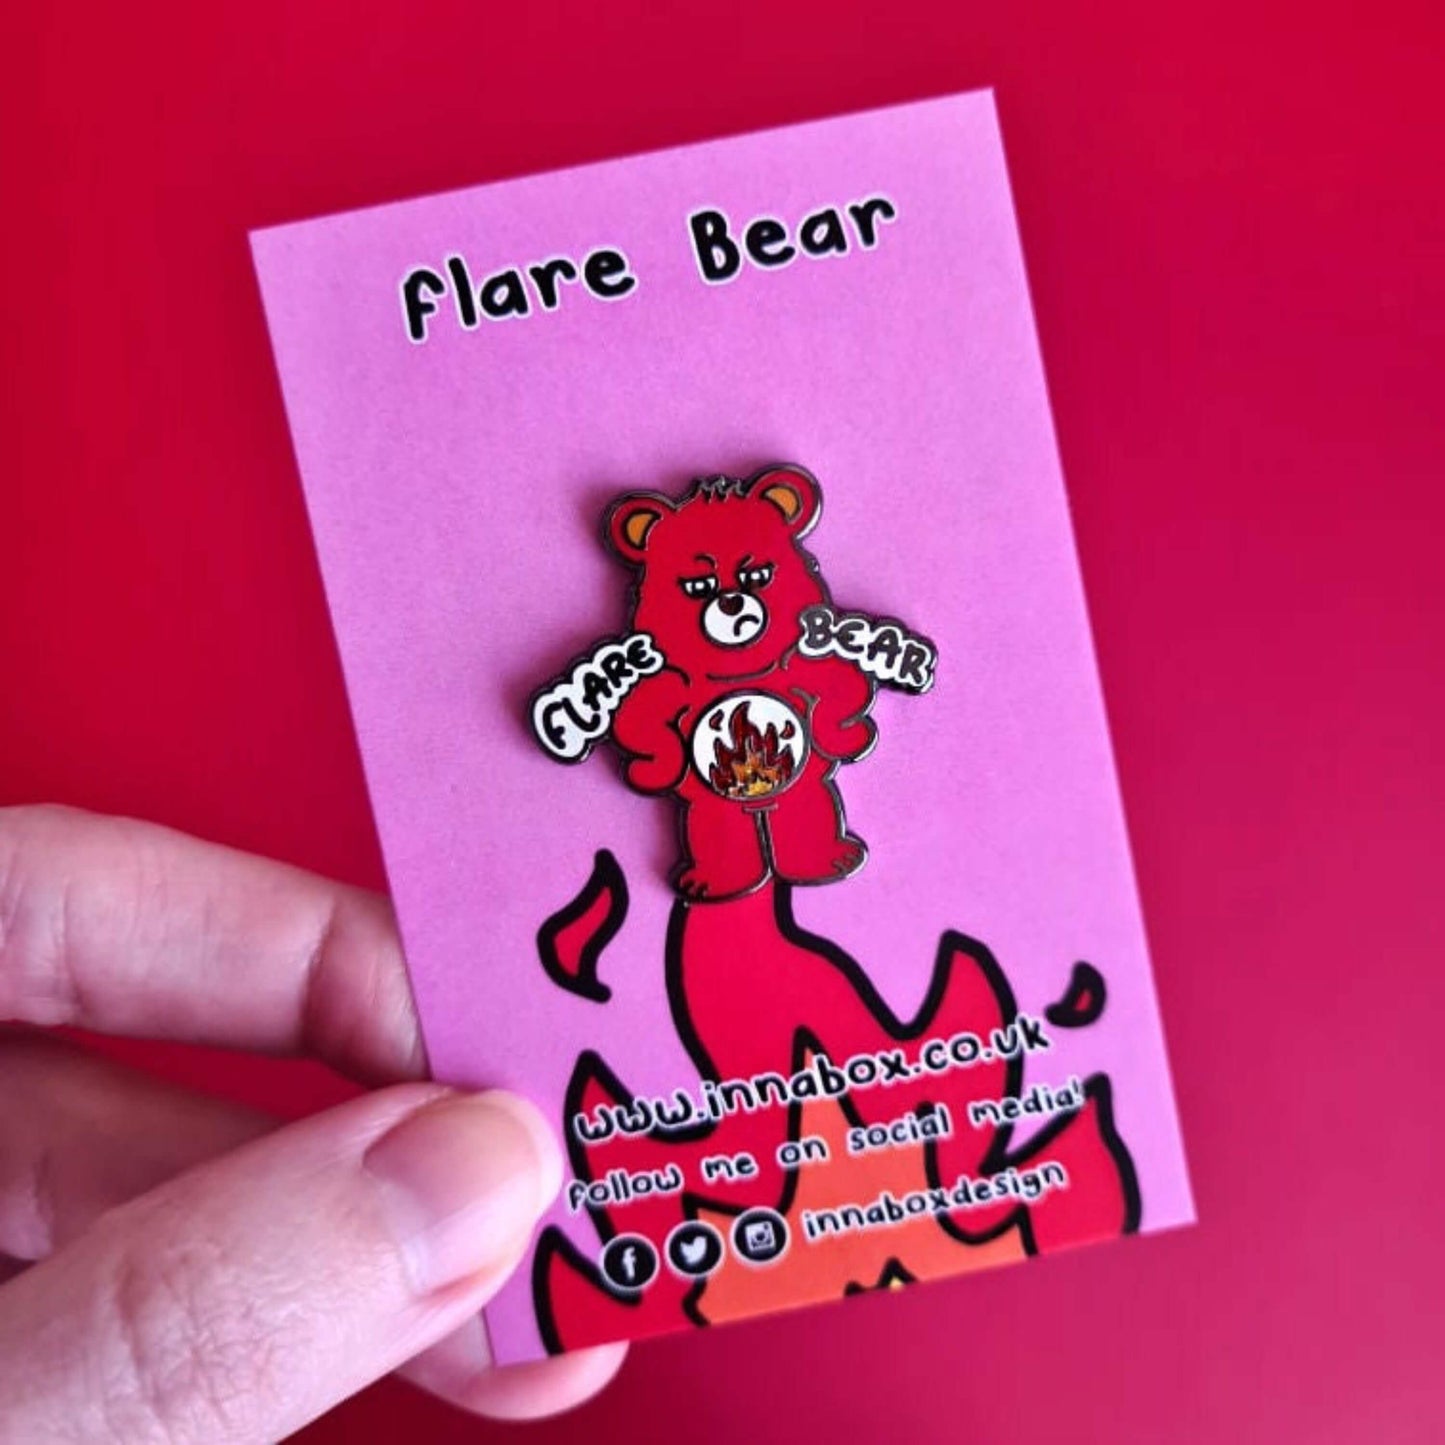 Flare Bear enamel pin on pink backing card with flames on held in front of a red background background. The enamel pin is of a red bear with a fed up expression and hands on its hips. There is a white circle on its belly with flames inside. Flare Bear is written on the pin. The enamel pin is designed to raise awareness for chronic illness flare ups.